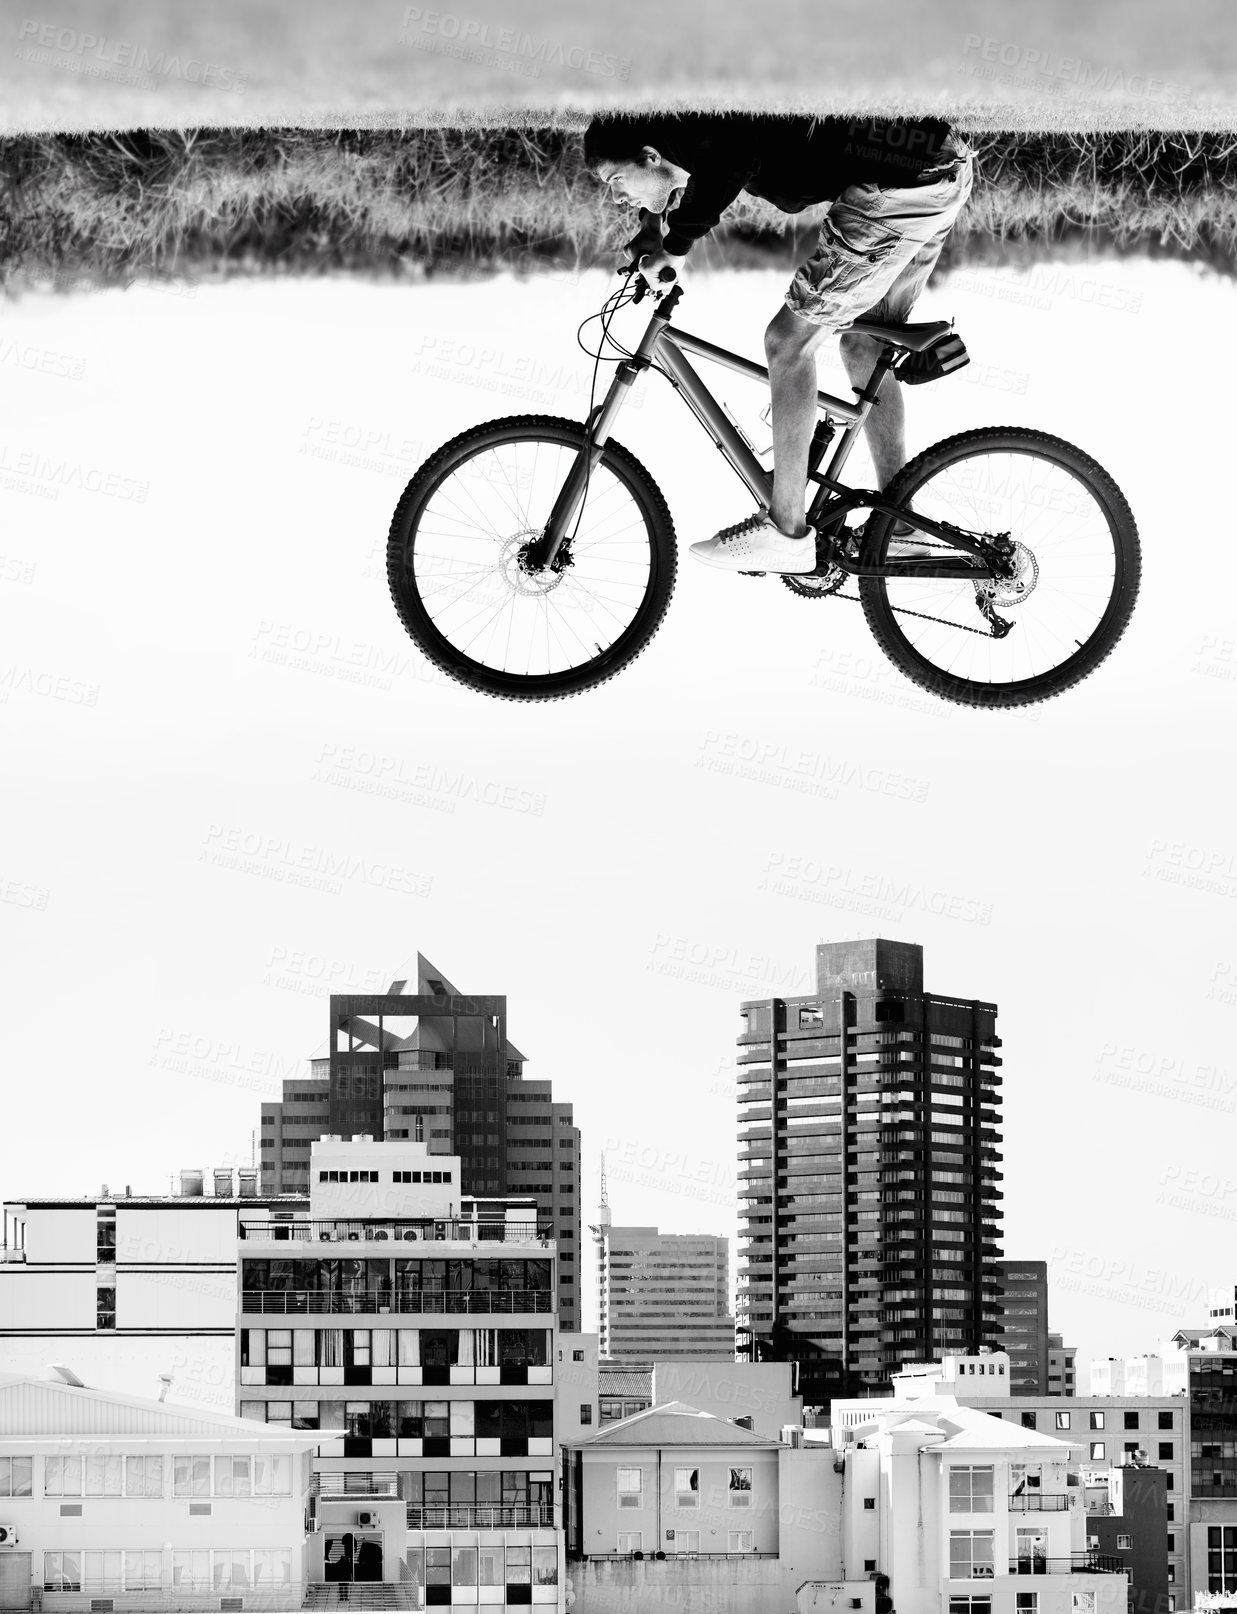 Buy stock photo A man on a bicycle hovers in the air over the rooftops of a city - perception